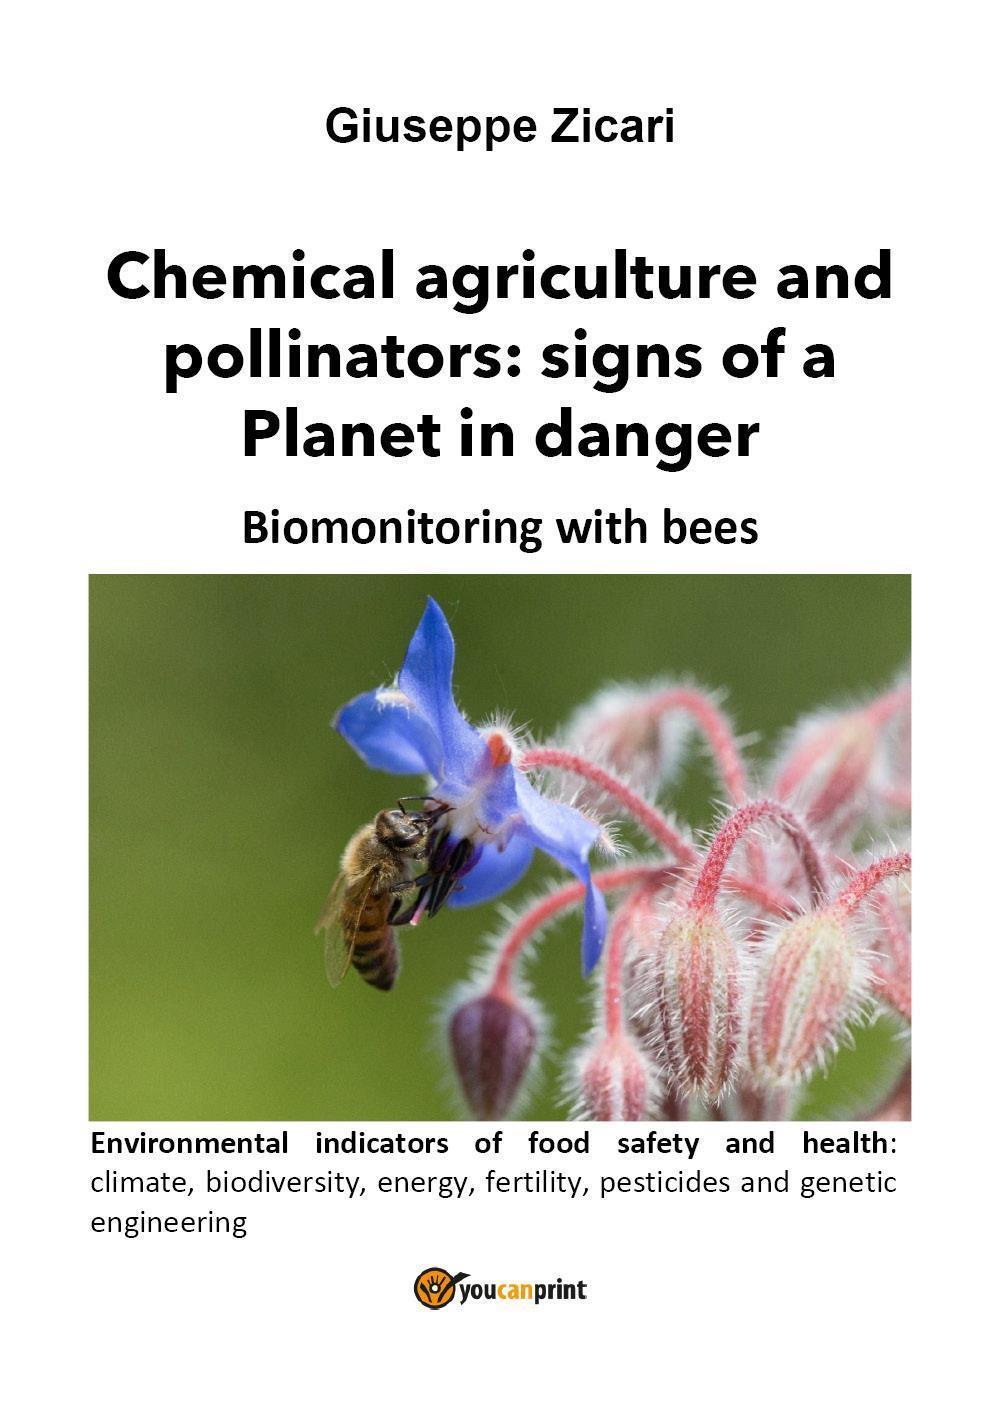 Chemical agriculture and pollinators: signs of a Planet in danger